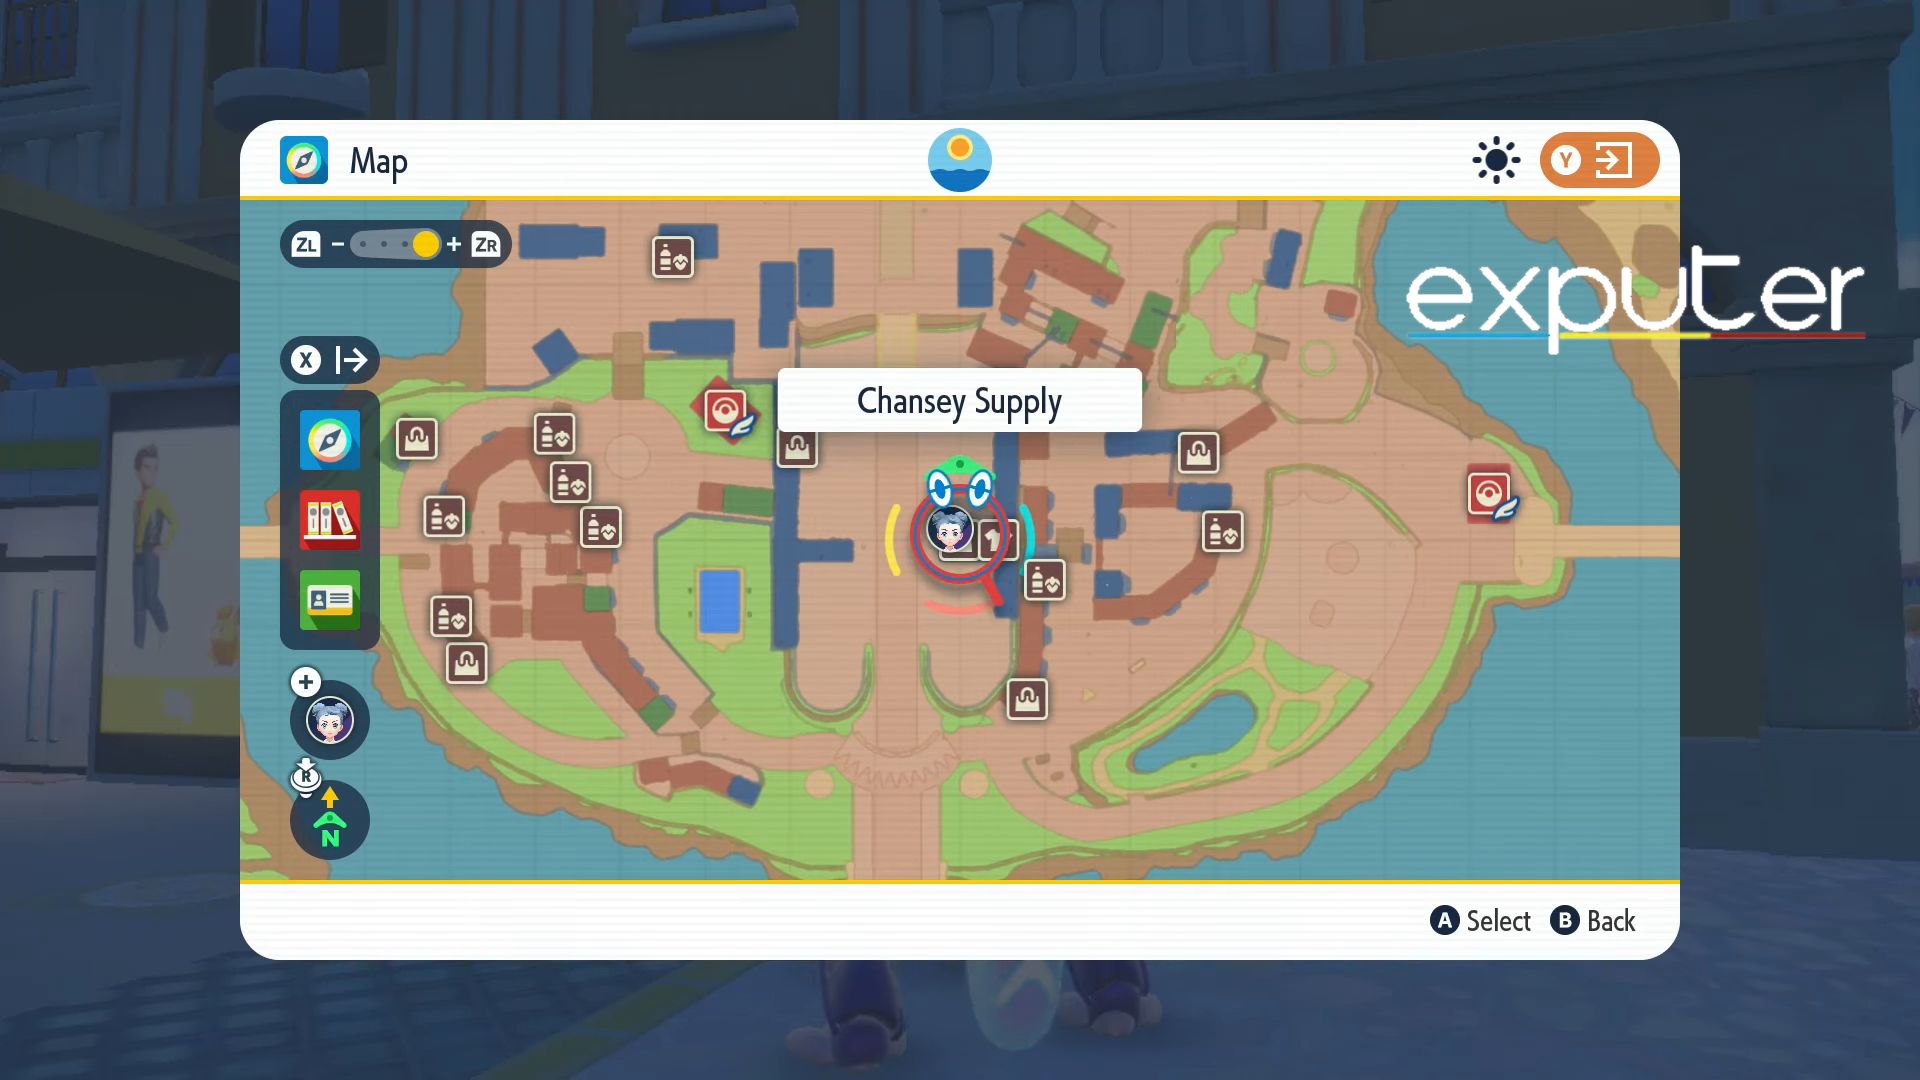 Chansey Supply example location